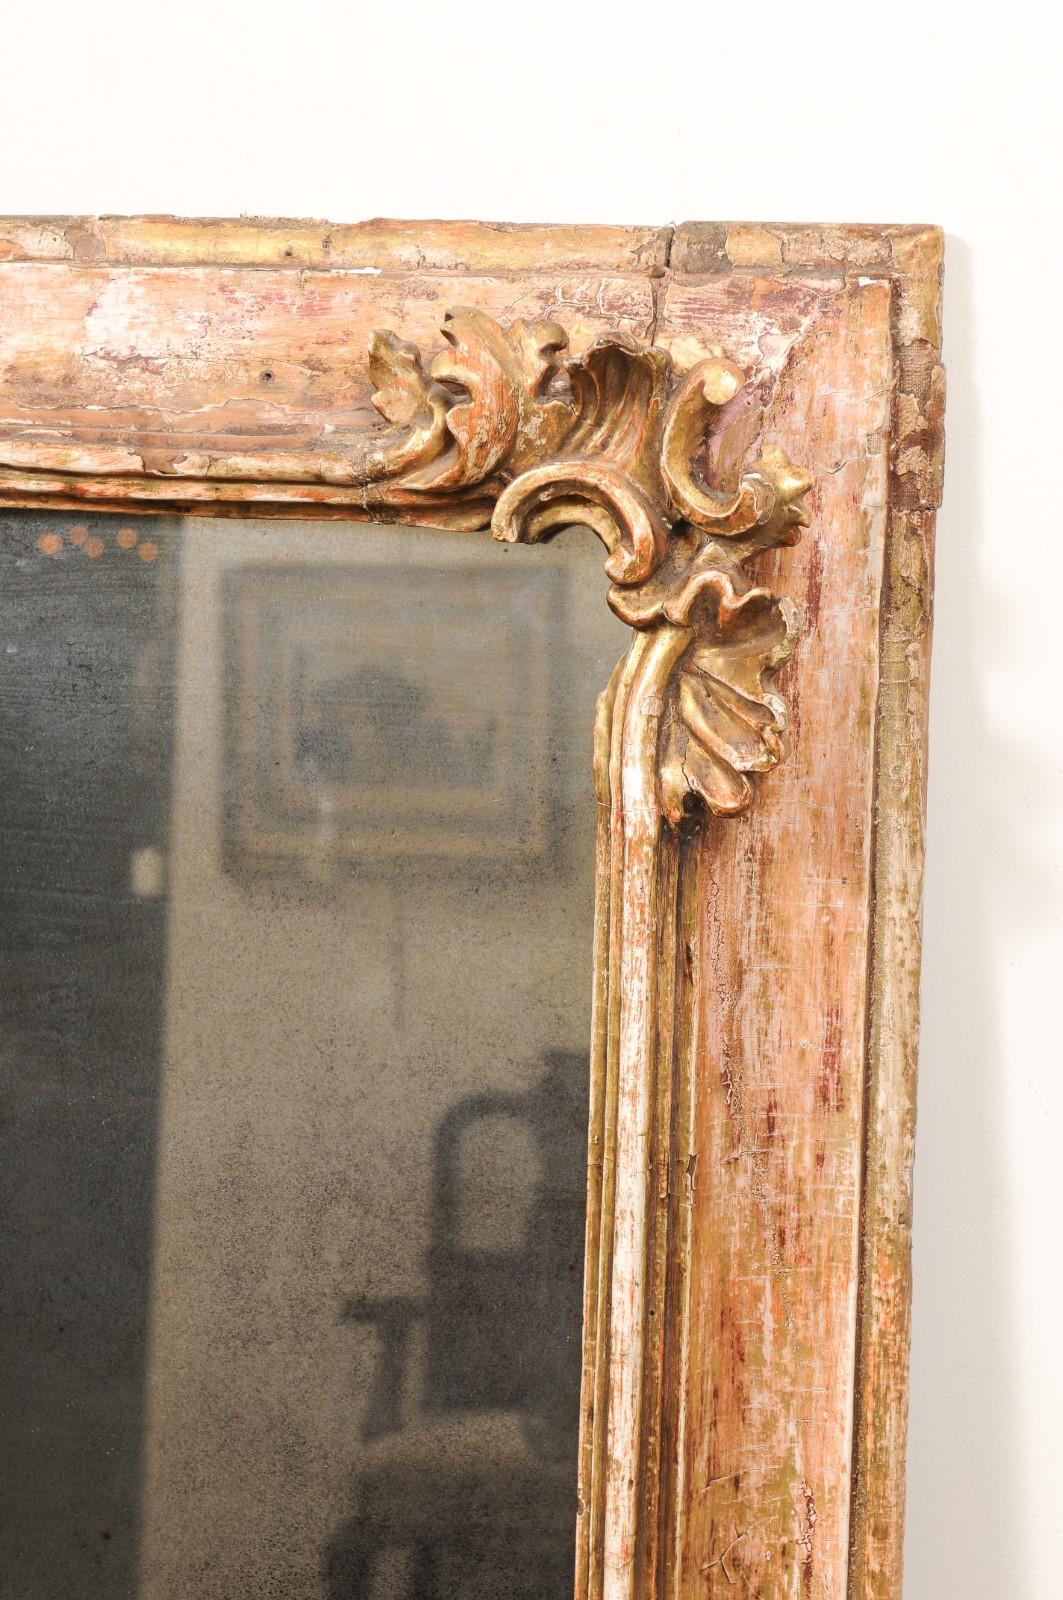  Large 19th C Continental Rococo Style Mirror w/ Stripped Gilt /Red Gesso finish For Sale 1